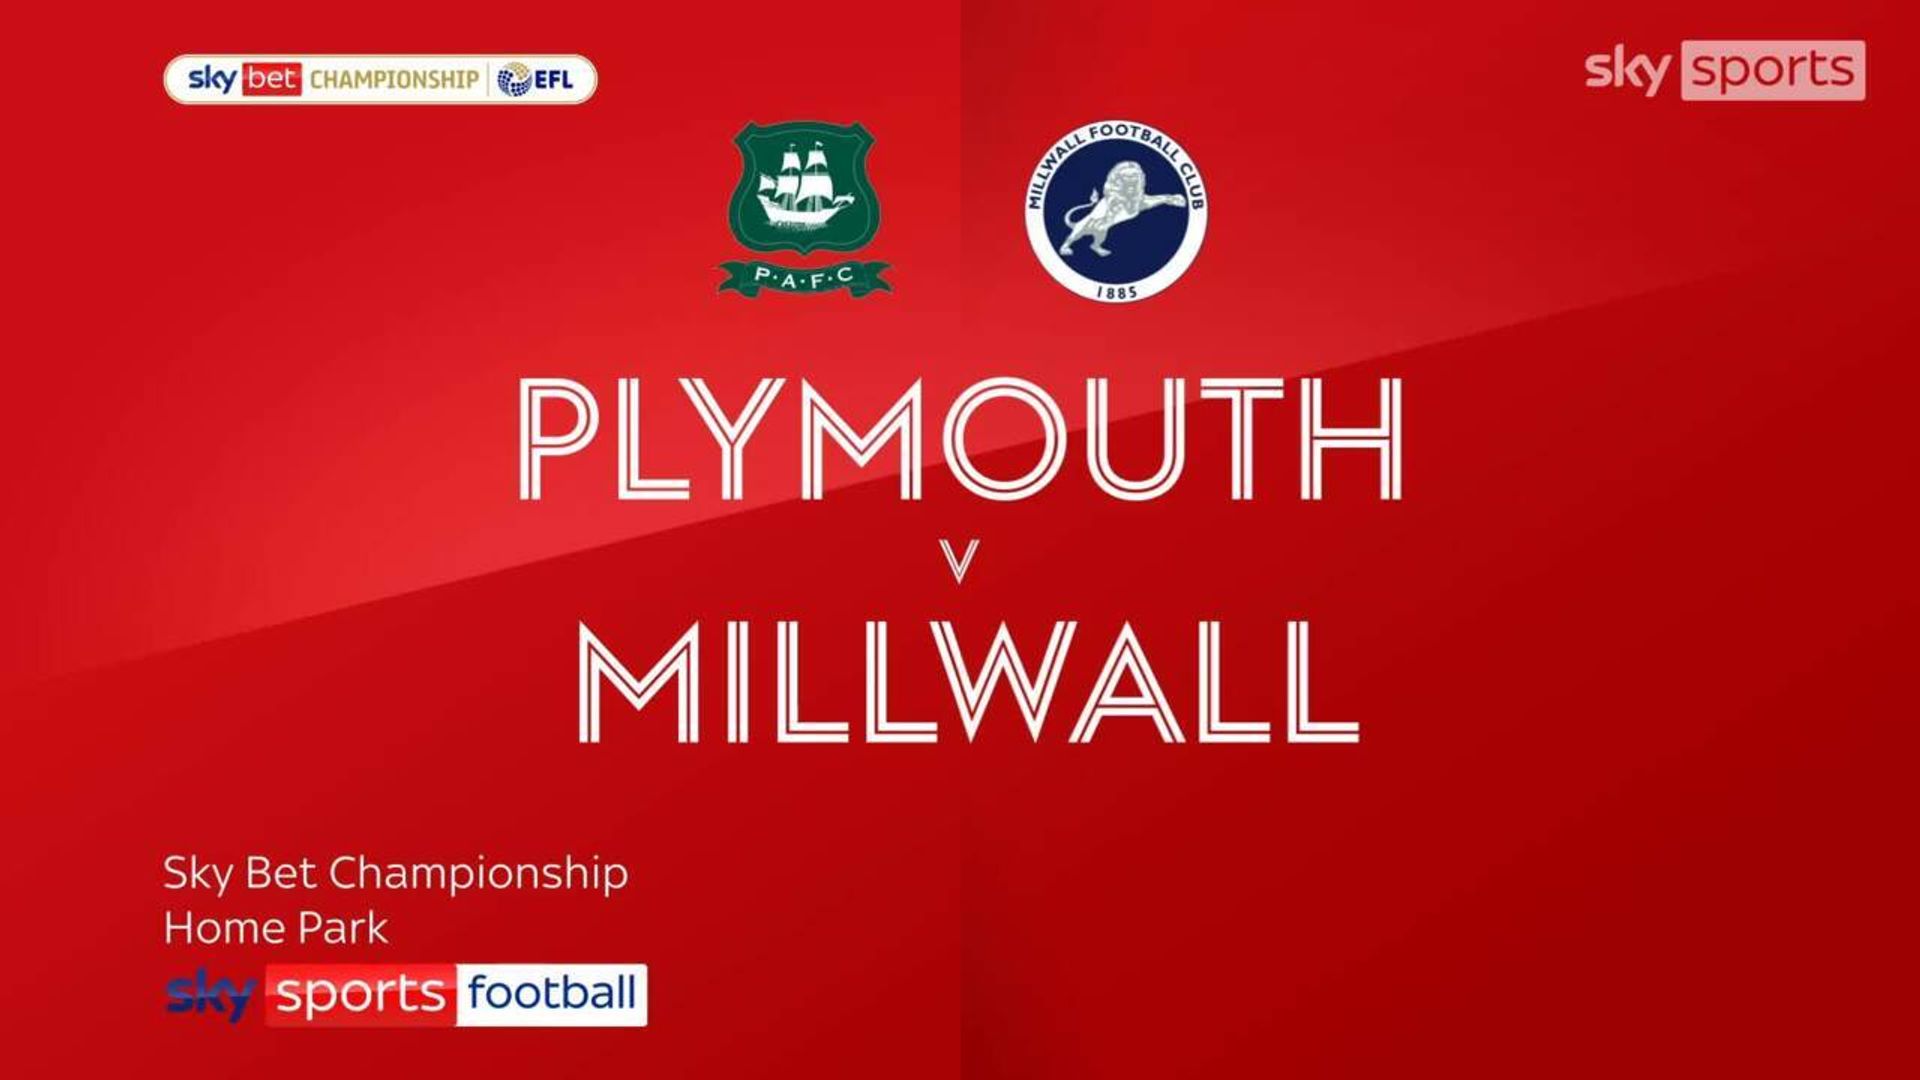 Plymouth 0-2 Millwall